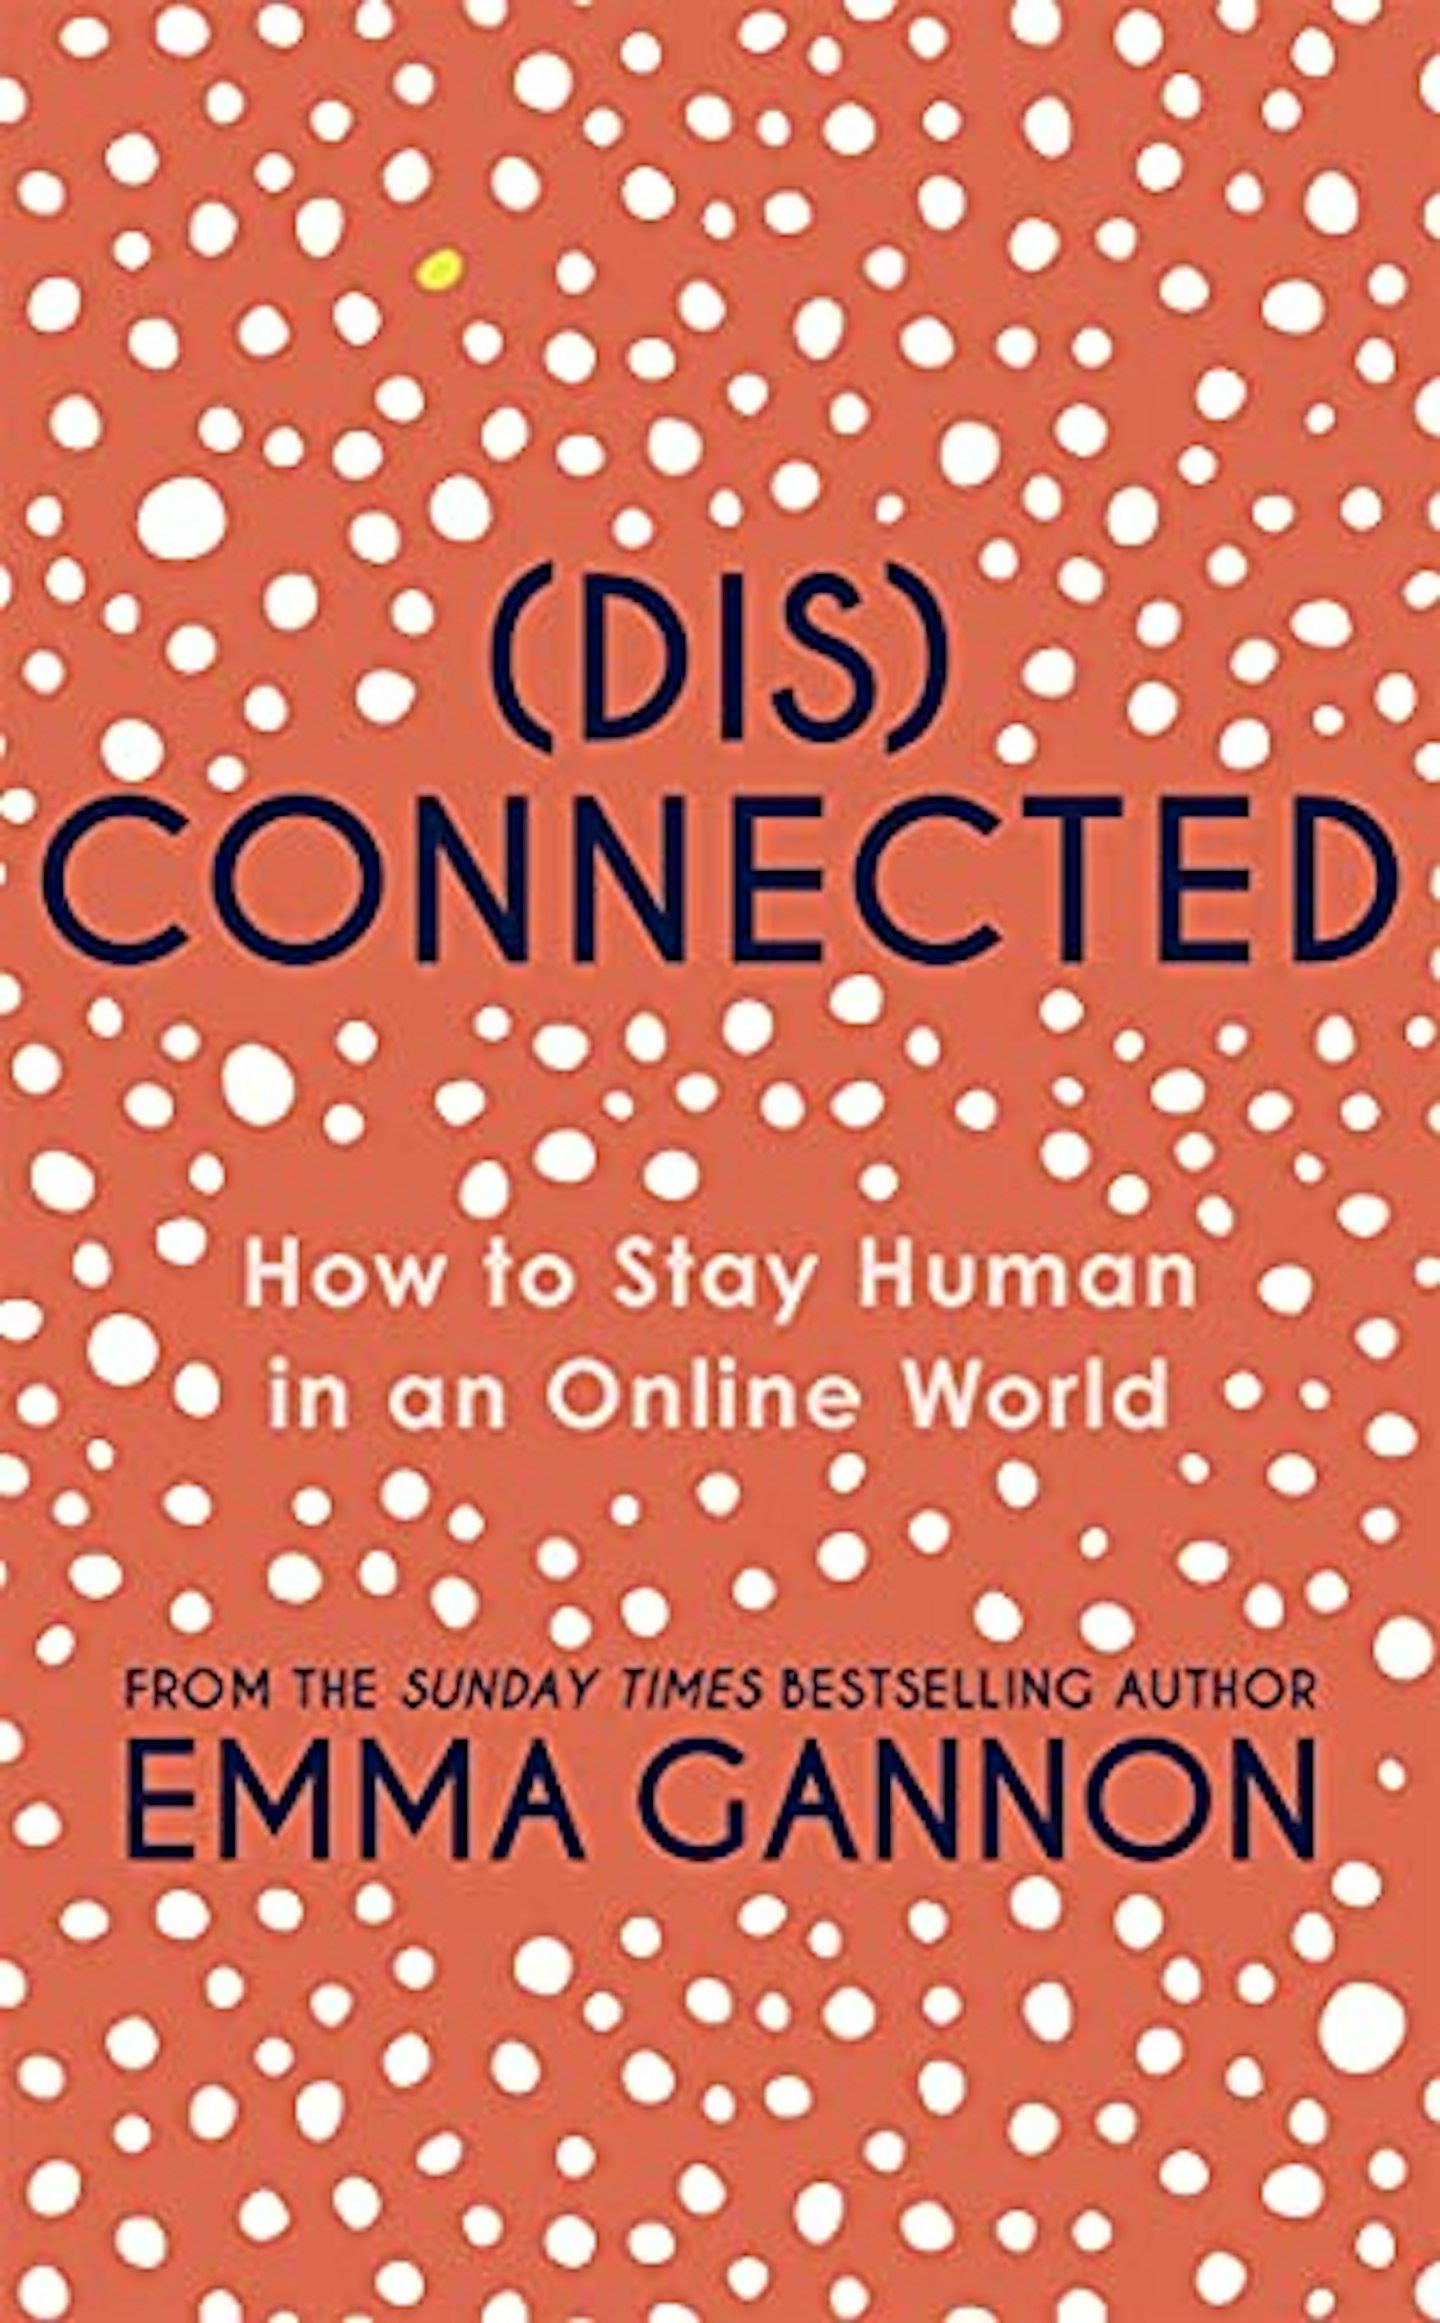 (Dis)connected - How To Stay Human In An Online World by Emma Gannon